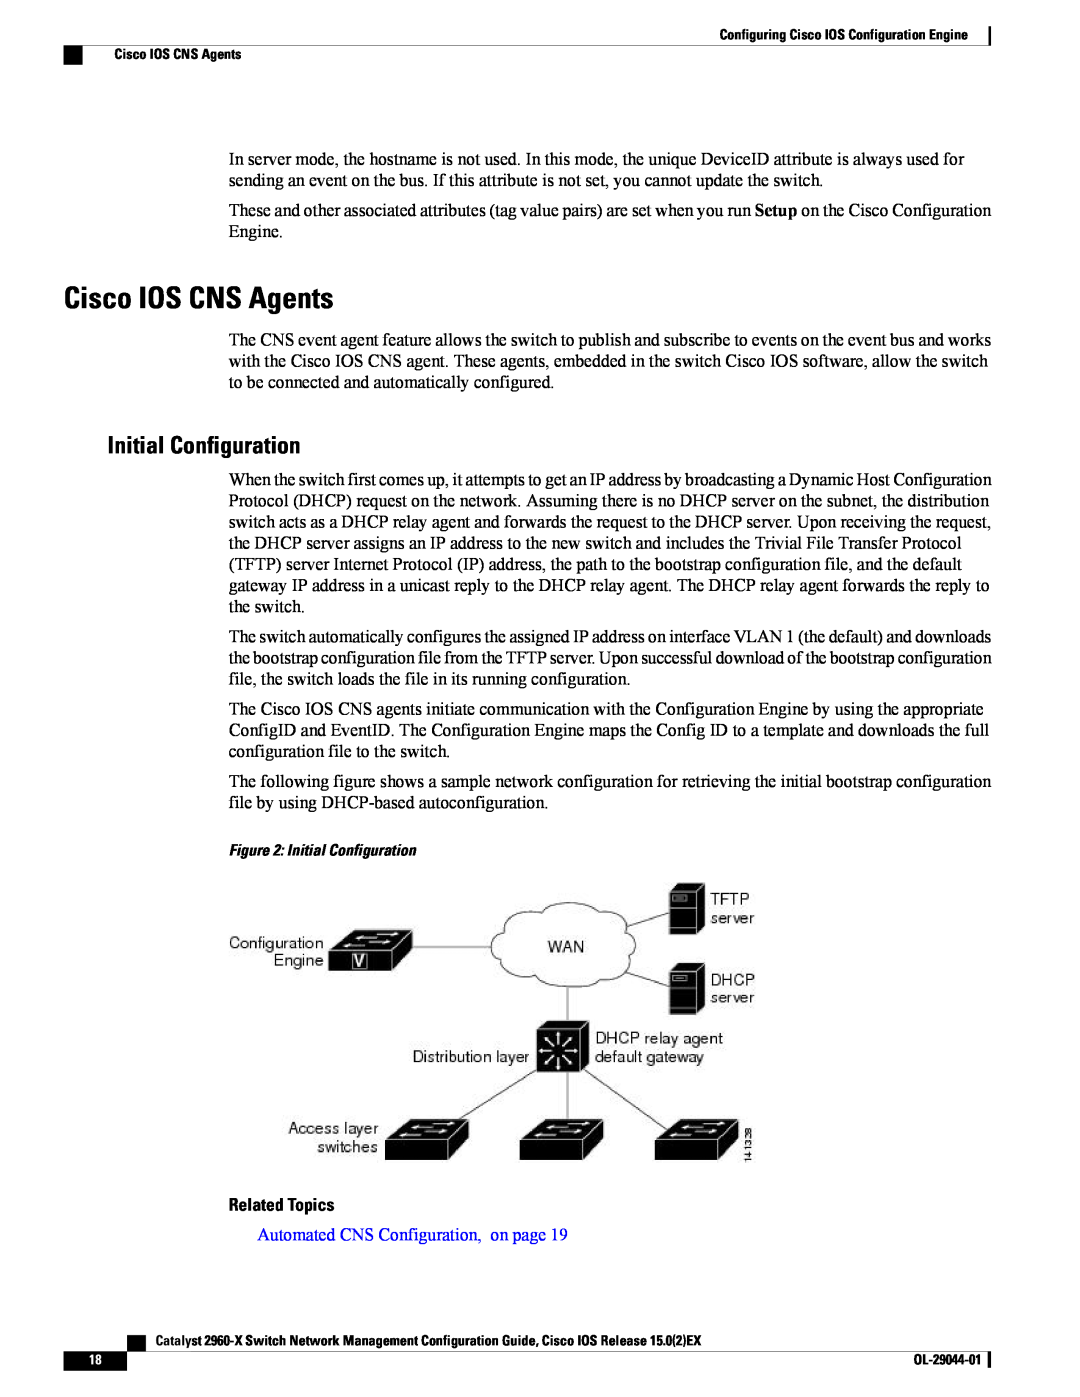 Cisco Systems WSC2960X24PSL, C2960XSTACK Cisco IOS CNS Agents, Initial Configuration, Automated CNS Configuration, on page 